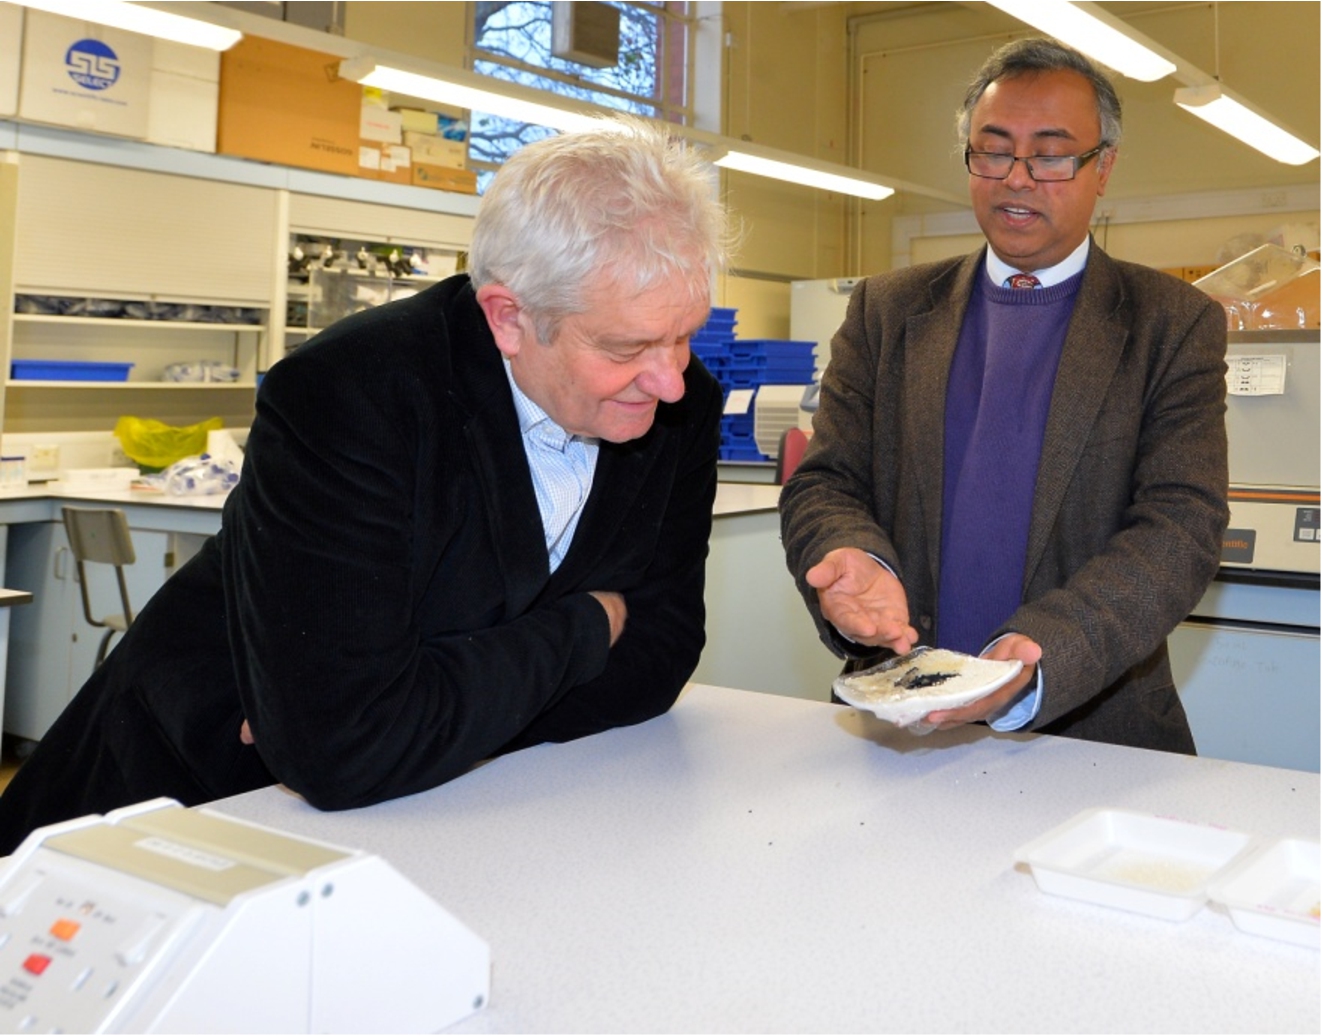 Nobel laureate, Sir Paul Nurse FRS (left), with the author of this article (6 December 2017). Sir Paul Nurse is looking at Bangladeshi aromatic rice (Kalijeera, considered to be the smallest rice in the world) and Nigella sativa seeds (known as Kalijeera in Bengali and after which the Kailjeera variety of Bangladeshi aromatic rice is named). Sir Paul Nurse officially opened the Laboratory of Biomedical and Environmental Health Research which carries out interdisciplinary research with spectroscopic techniques playing a central role. Photo credit: Alex Hannam.